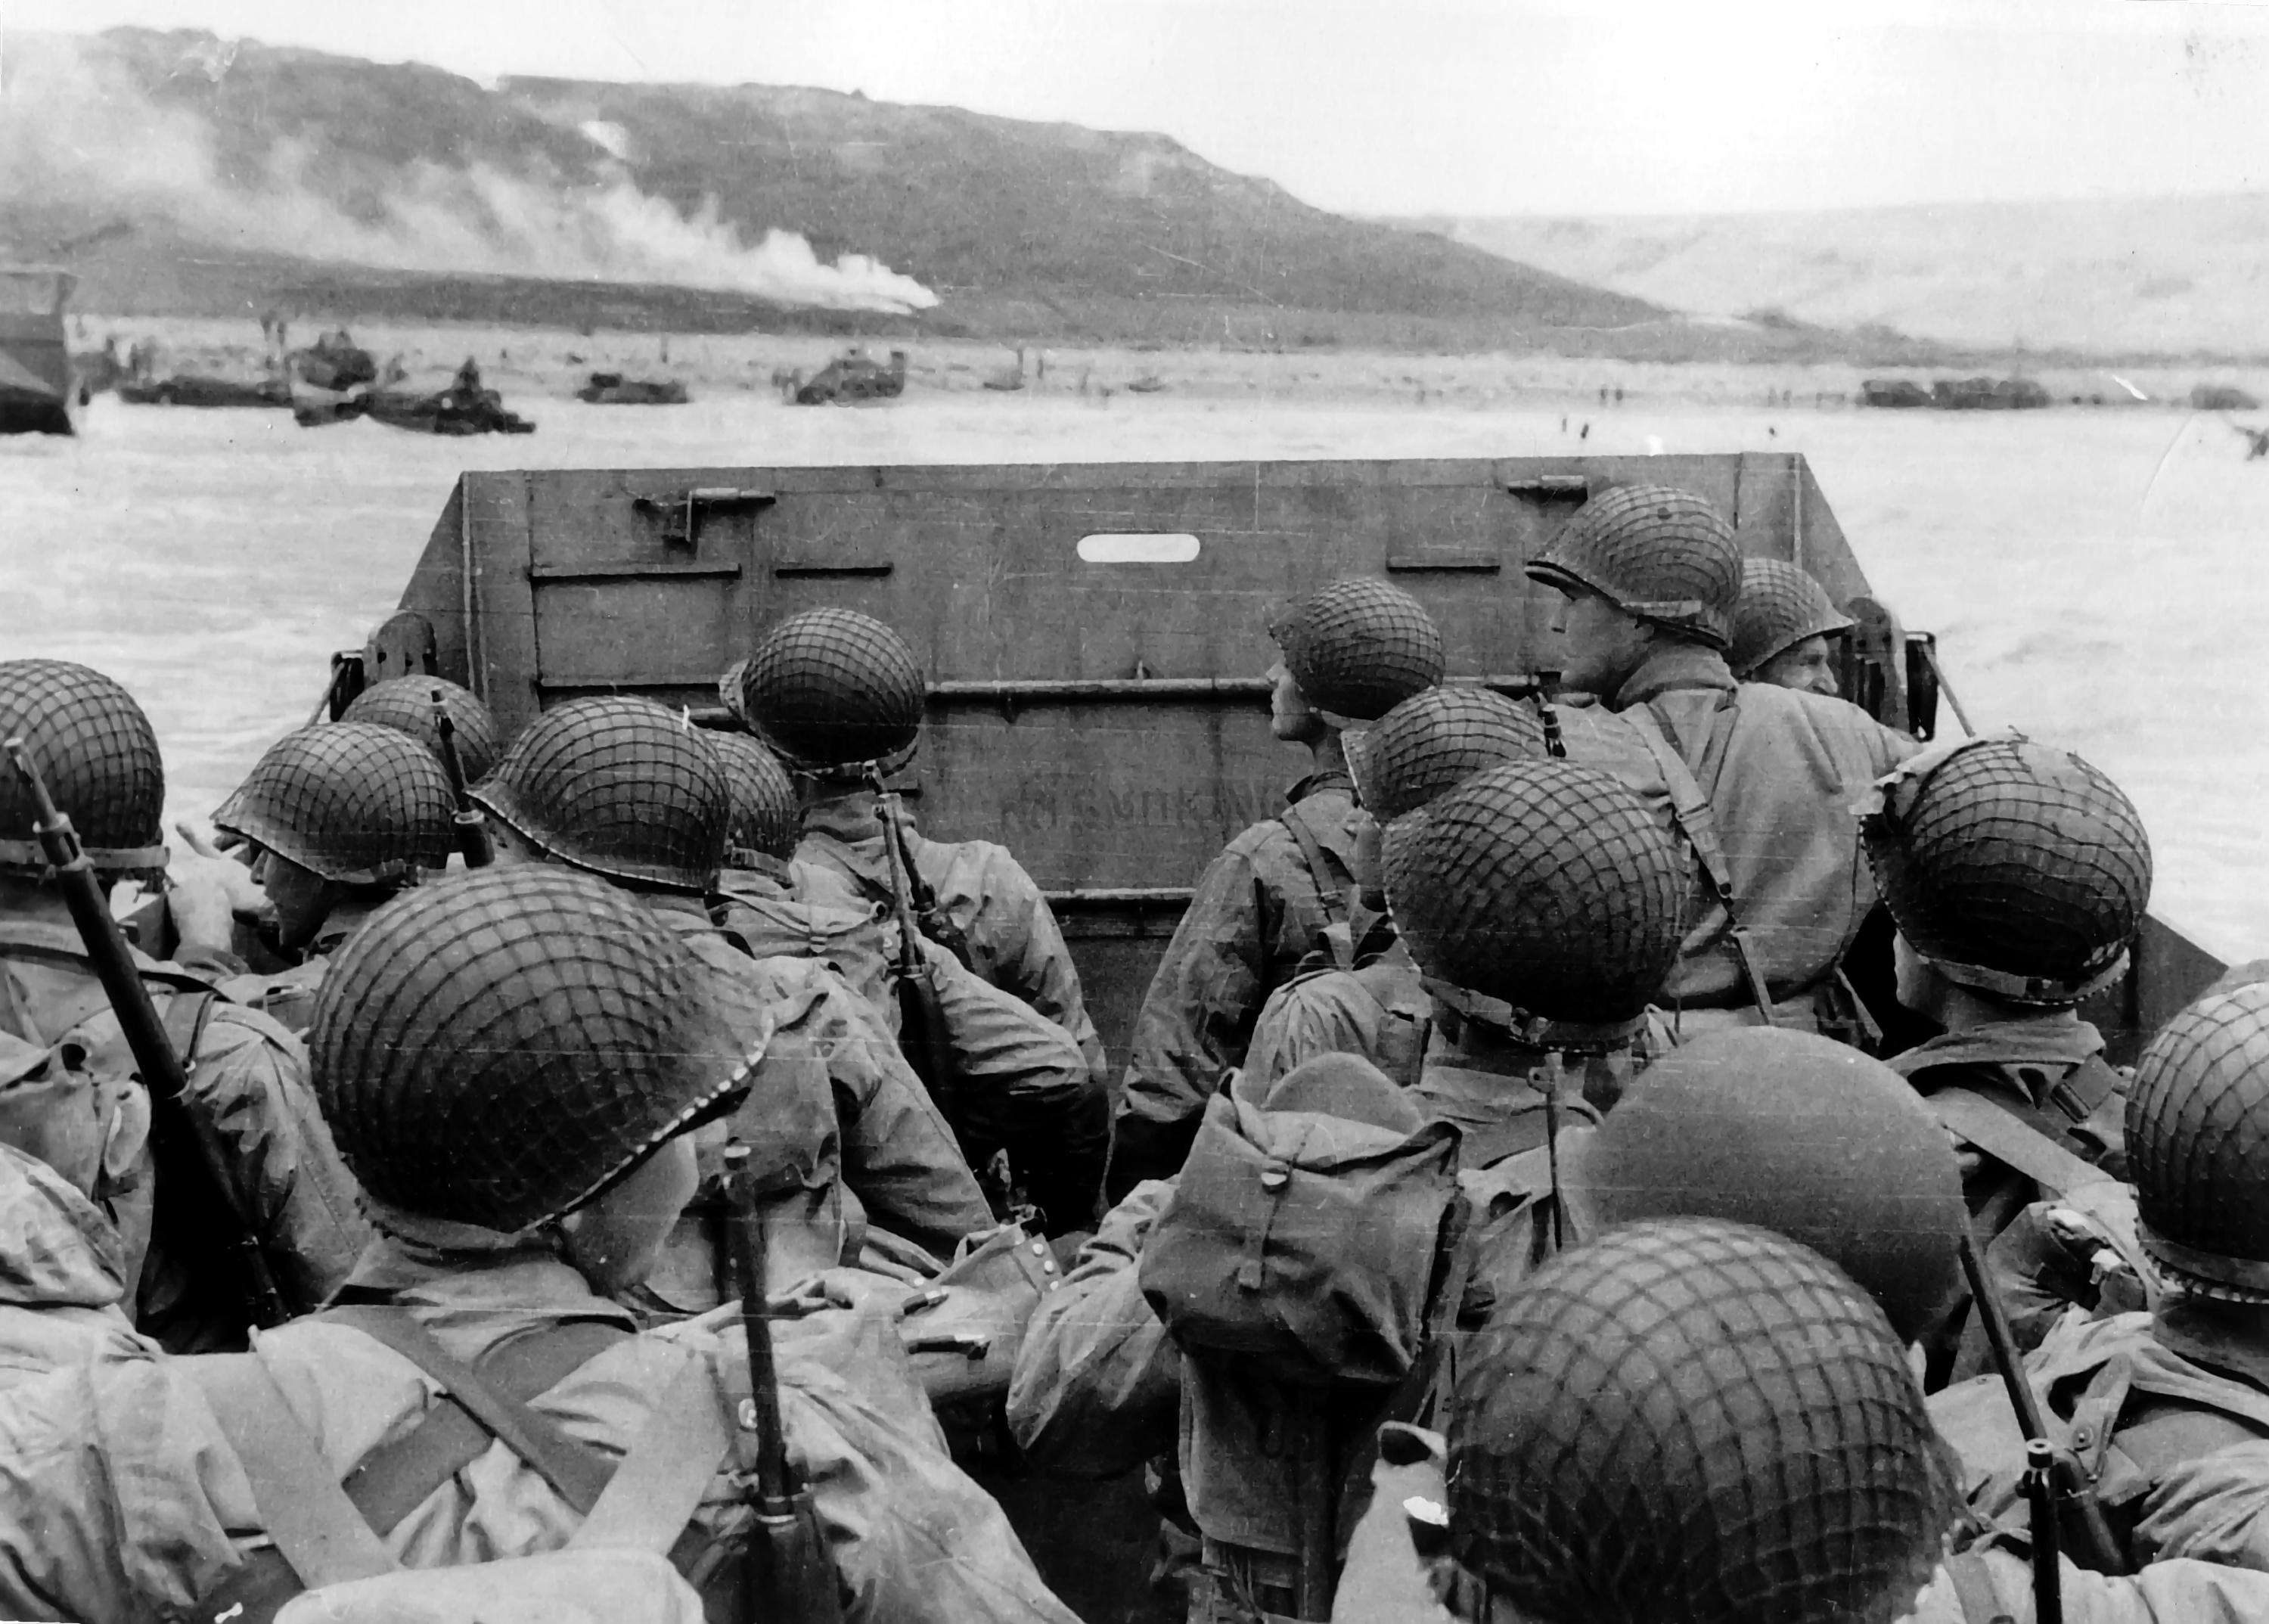 American troops watched activity ashore on Omaha Beach as their LCVP landing craft approached the shore, Normandy, 6 Jun 1944, photo 1 of 2